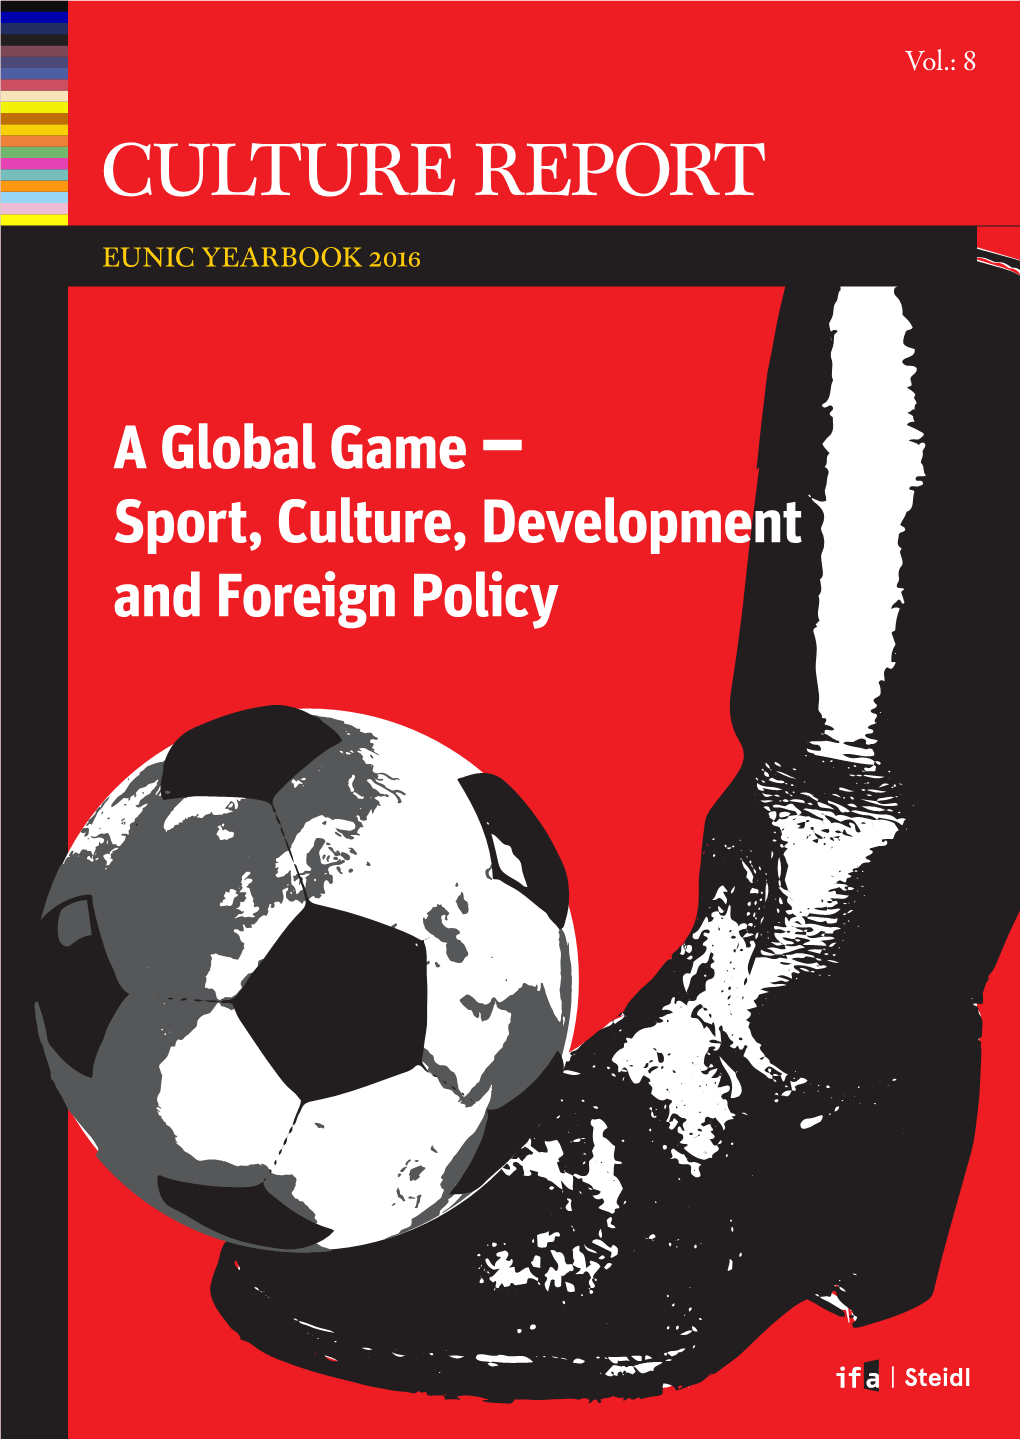 CULTURE REPORT CULTURE EUNIC YEARBOOK 2016 YEARBOOK EUNIC a Global Game and Foreign Policy Foreign and Culture, Development Sport, –